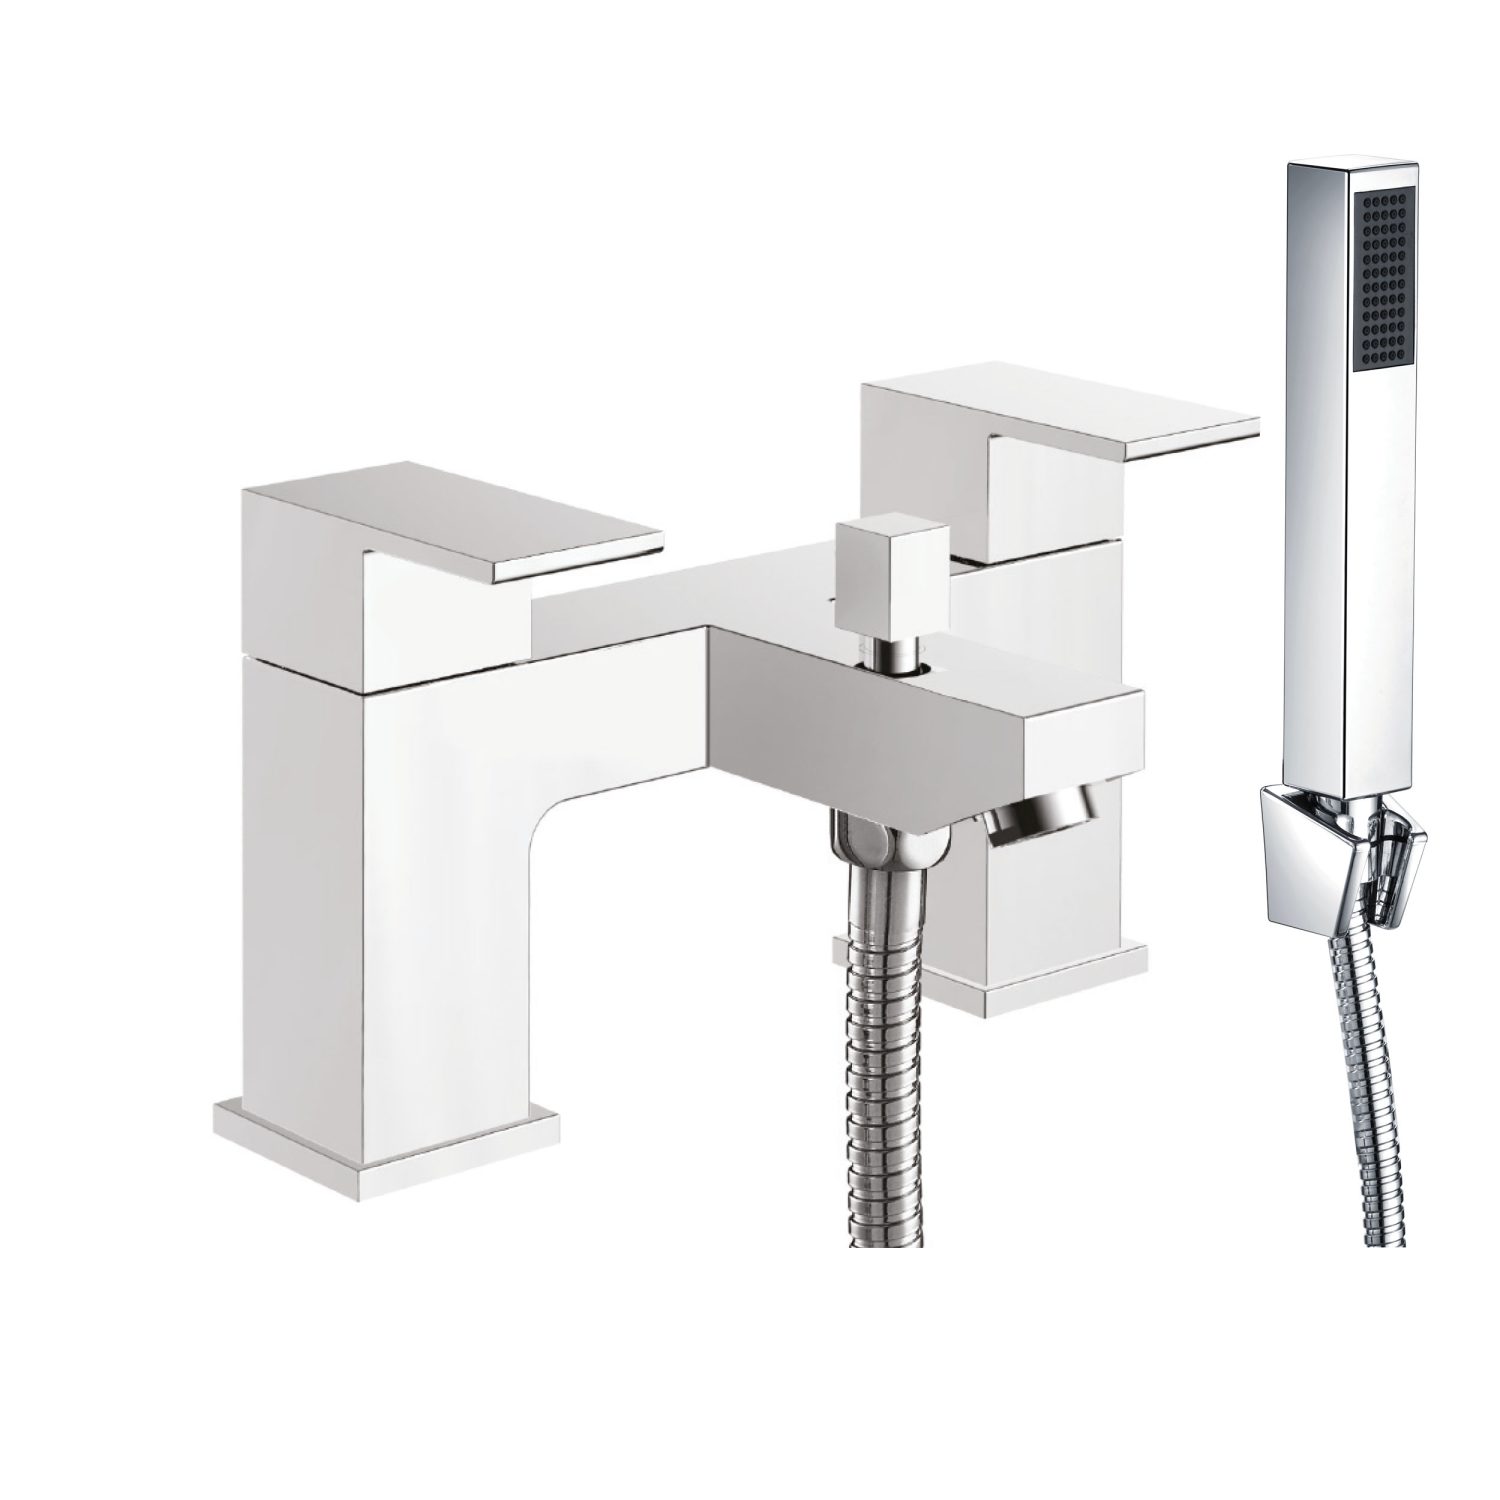 Lanza Bath Shower Mixer with shower kit and wall bracket